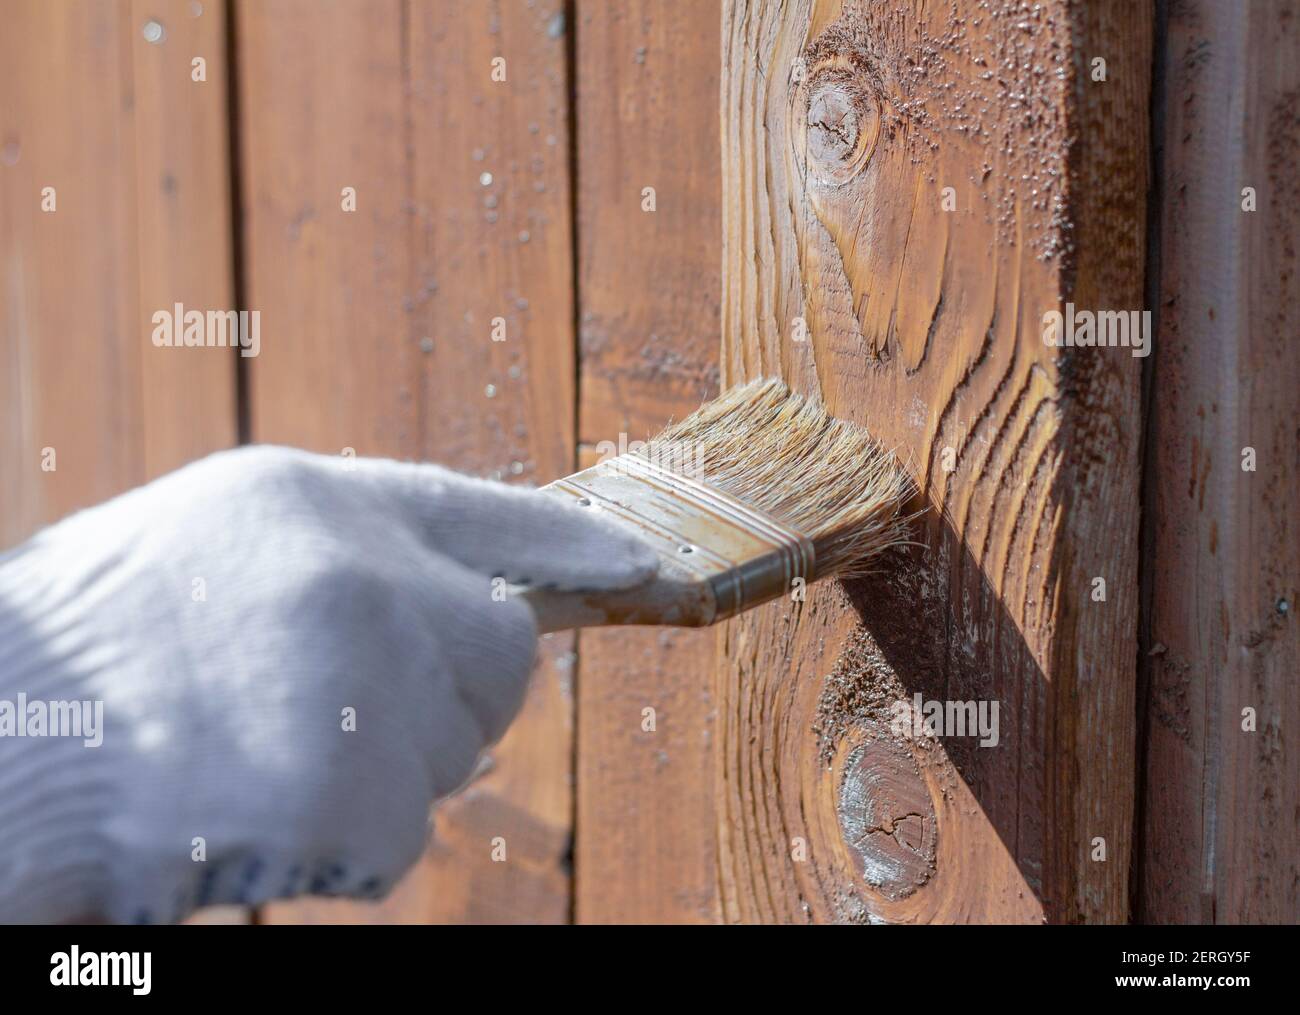 Closeup Of Hand Wearing Protective Work Gloves With Brush Paintbrush  Applying Stain To Cedar Wood Shingles Exterior Siding Home Maintenance  Renovation Improvement Diy Projects Stock Photo - Download Image Now -  iStock